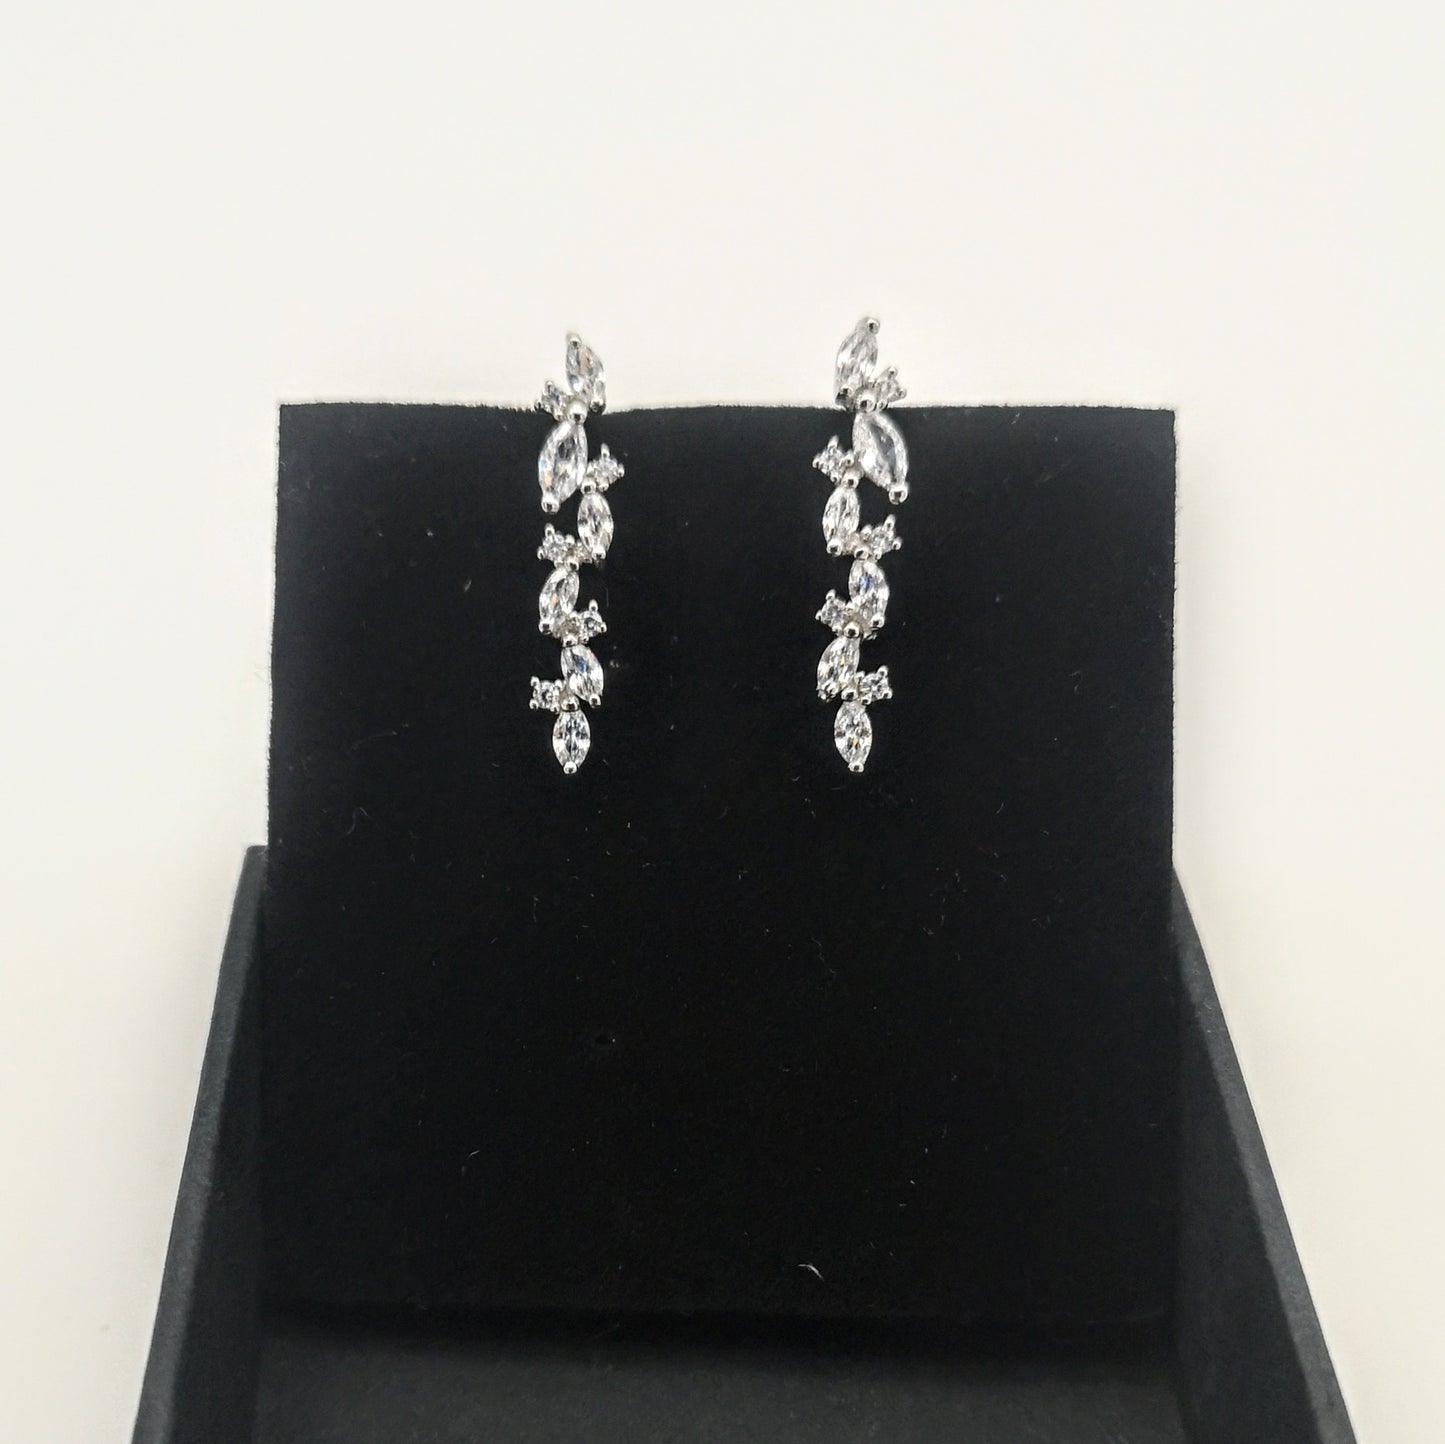 Sterling Silver CZ Ear Climbers